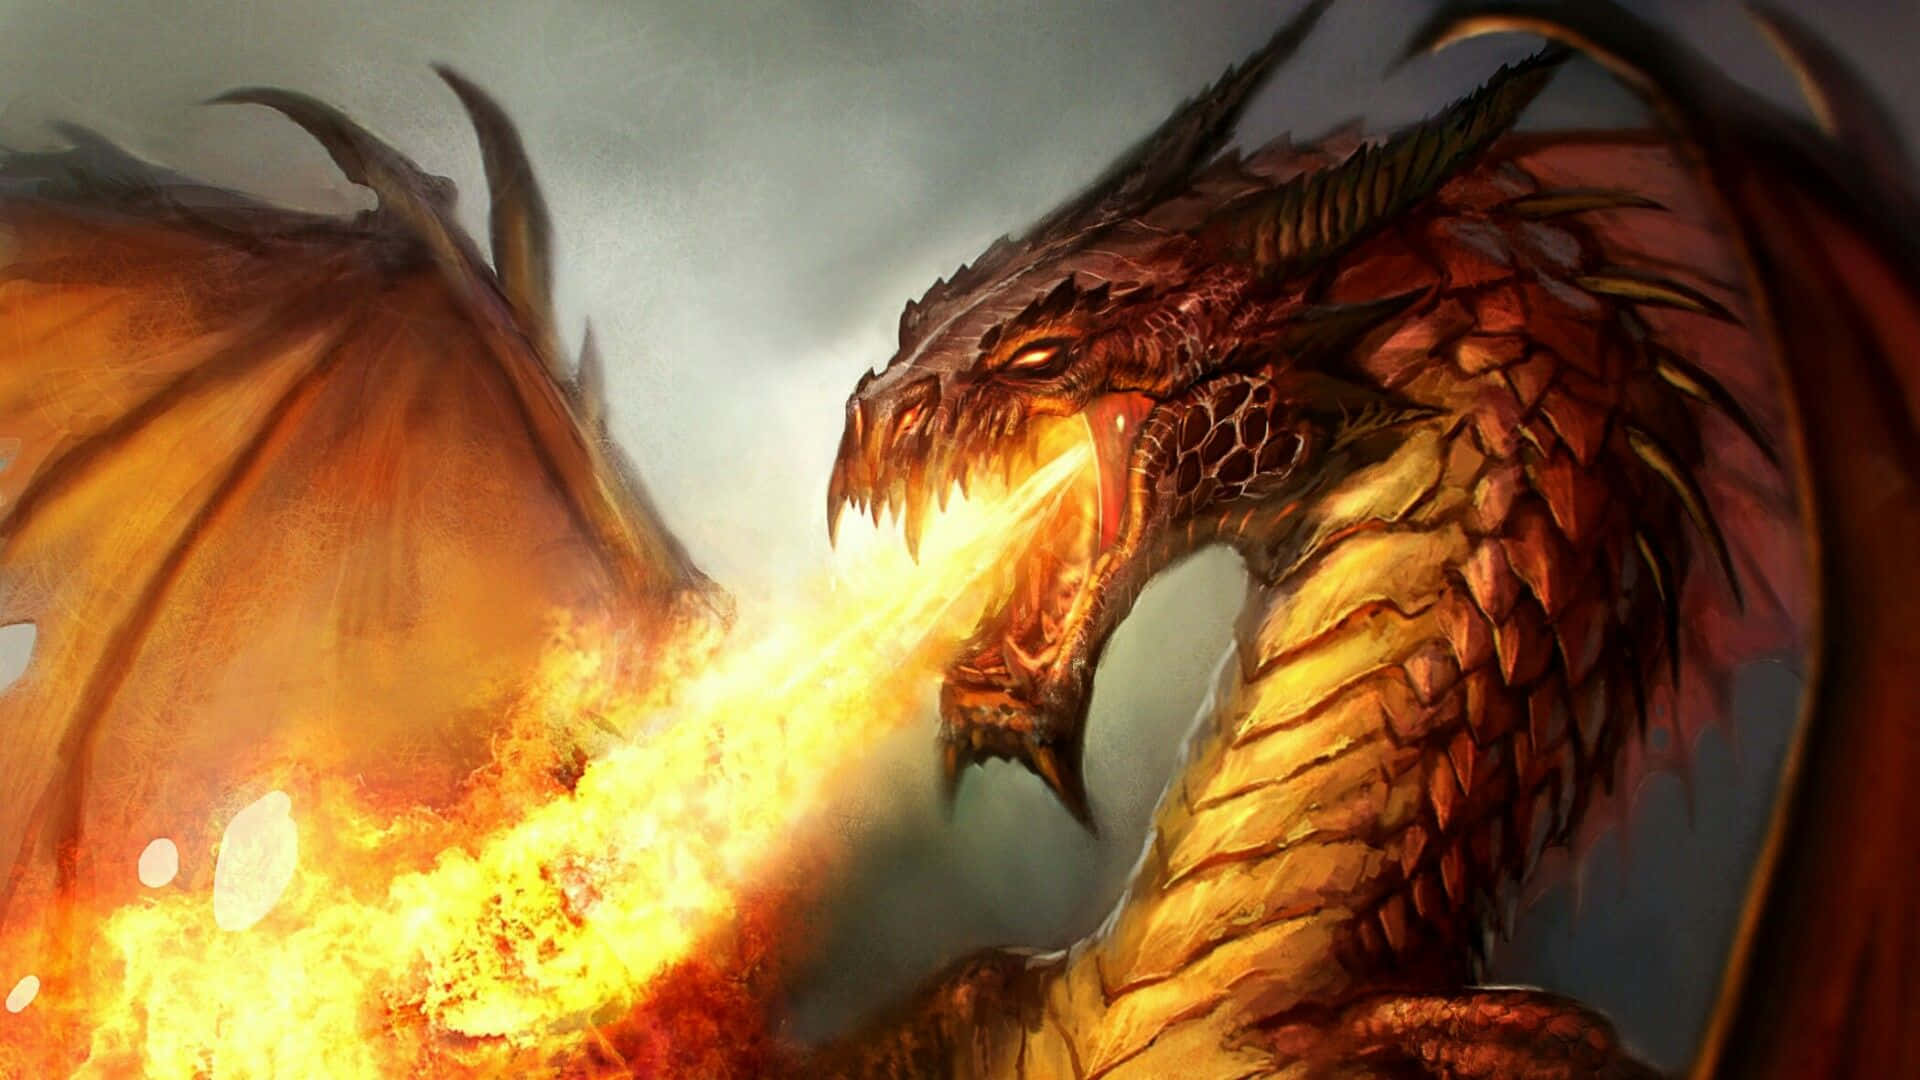 Scary Dragon With Fire Blast Wallpaper